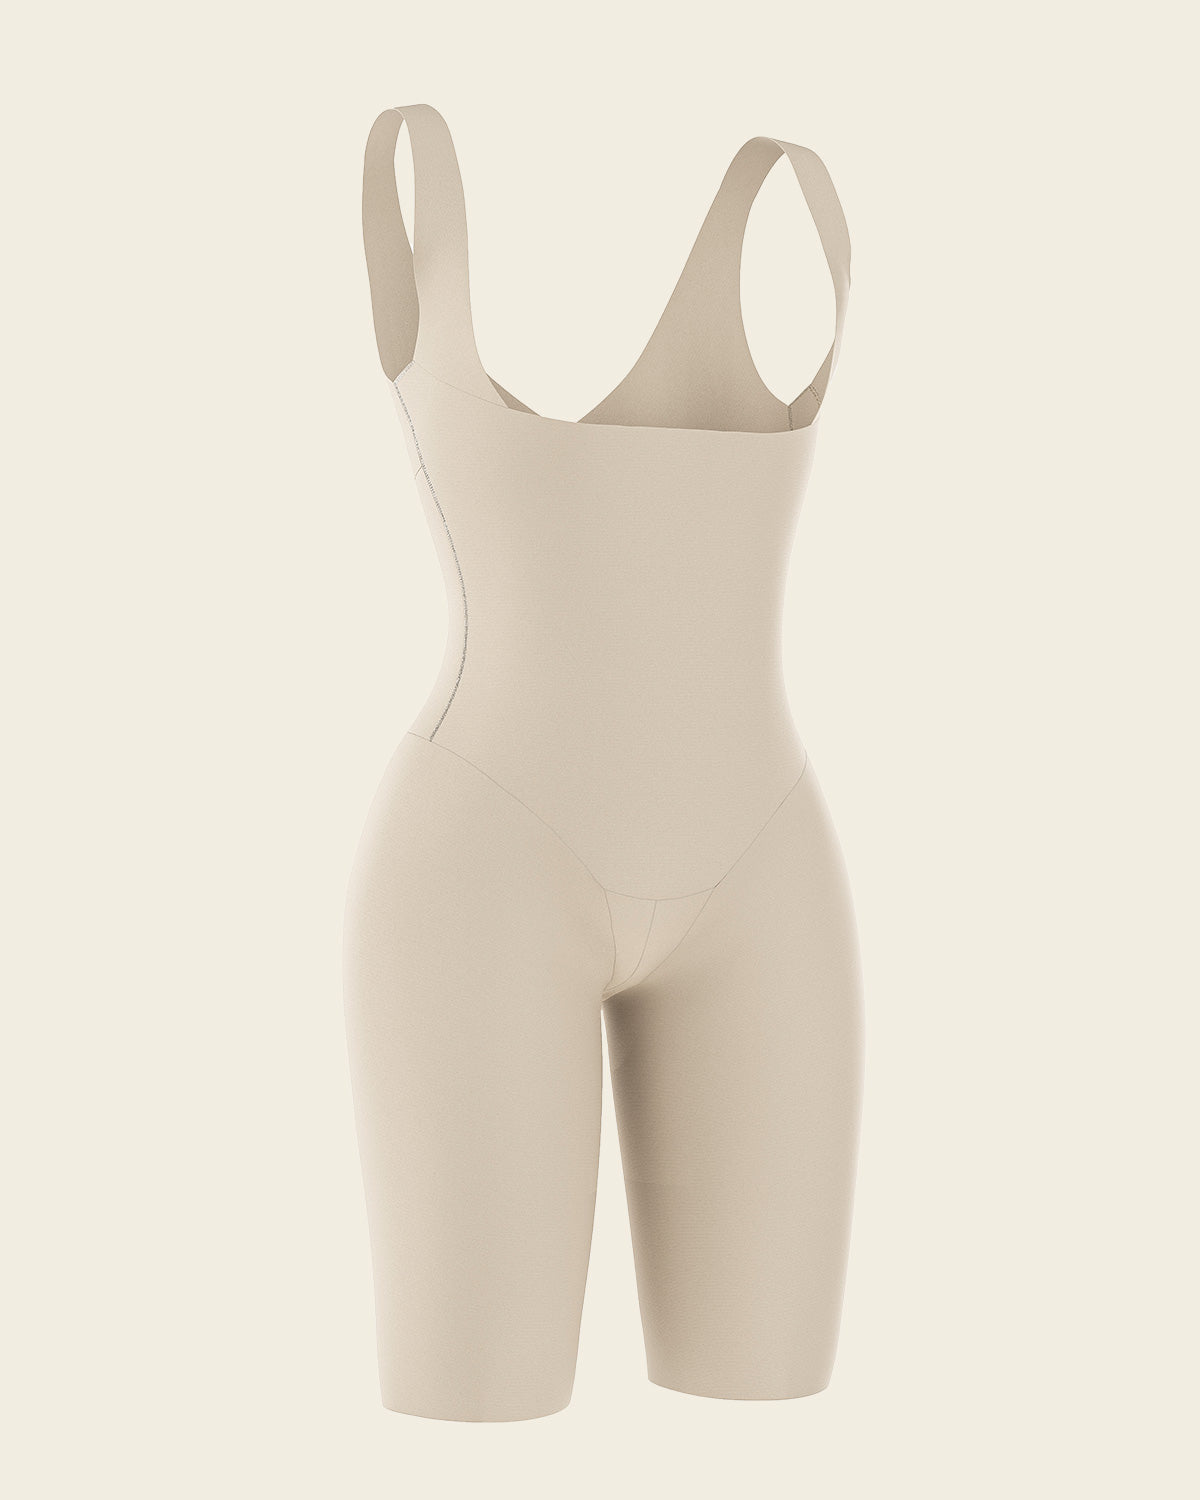 Buttoned Body Shapewear For Hunchback - Inspire Uplift